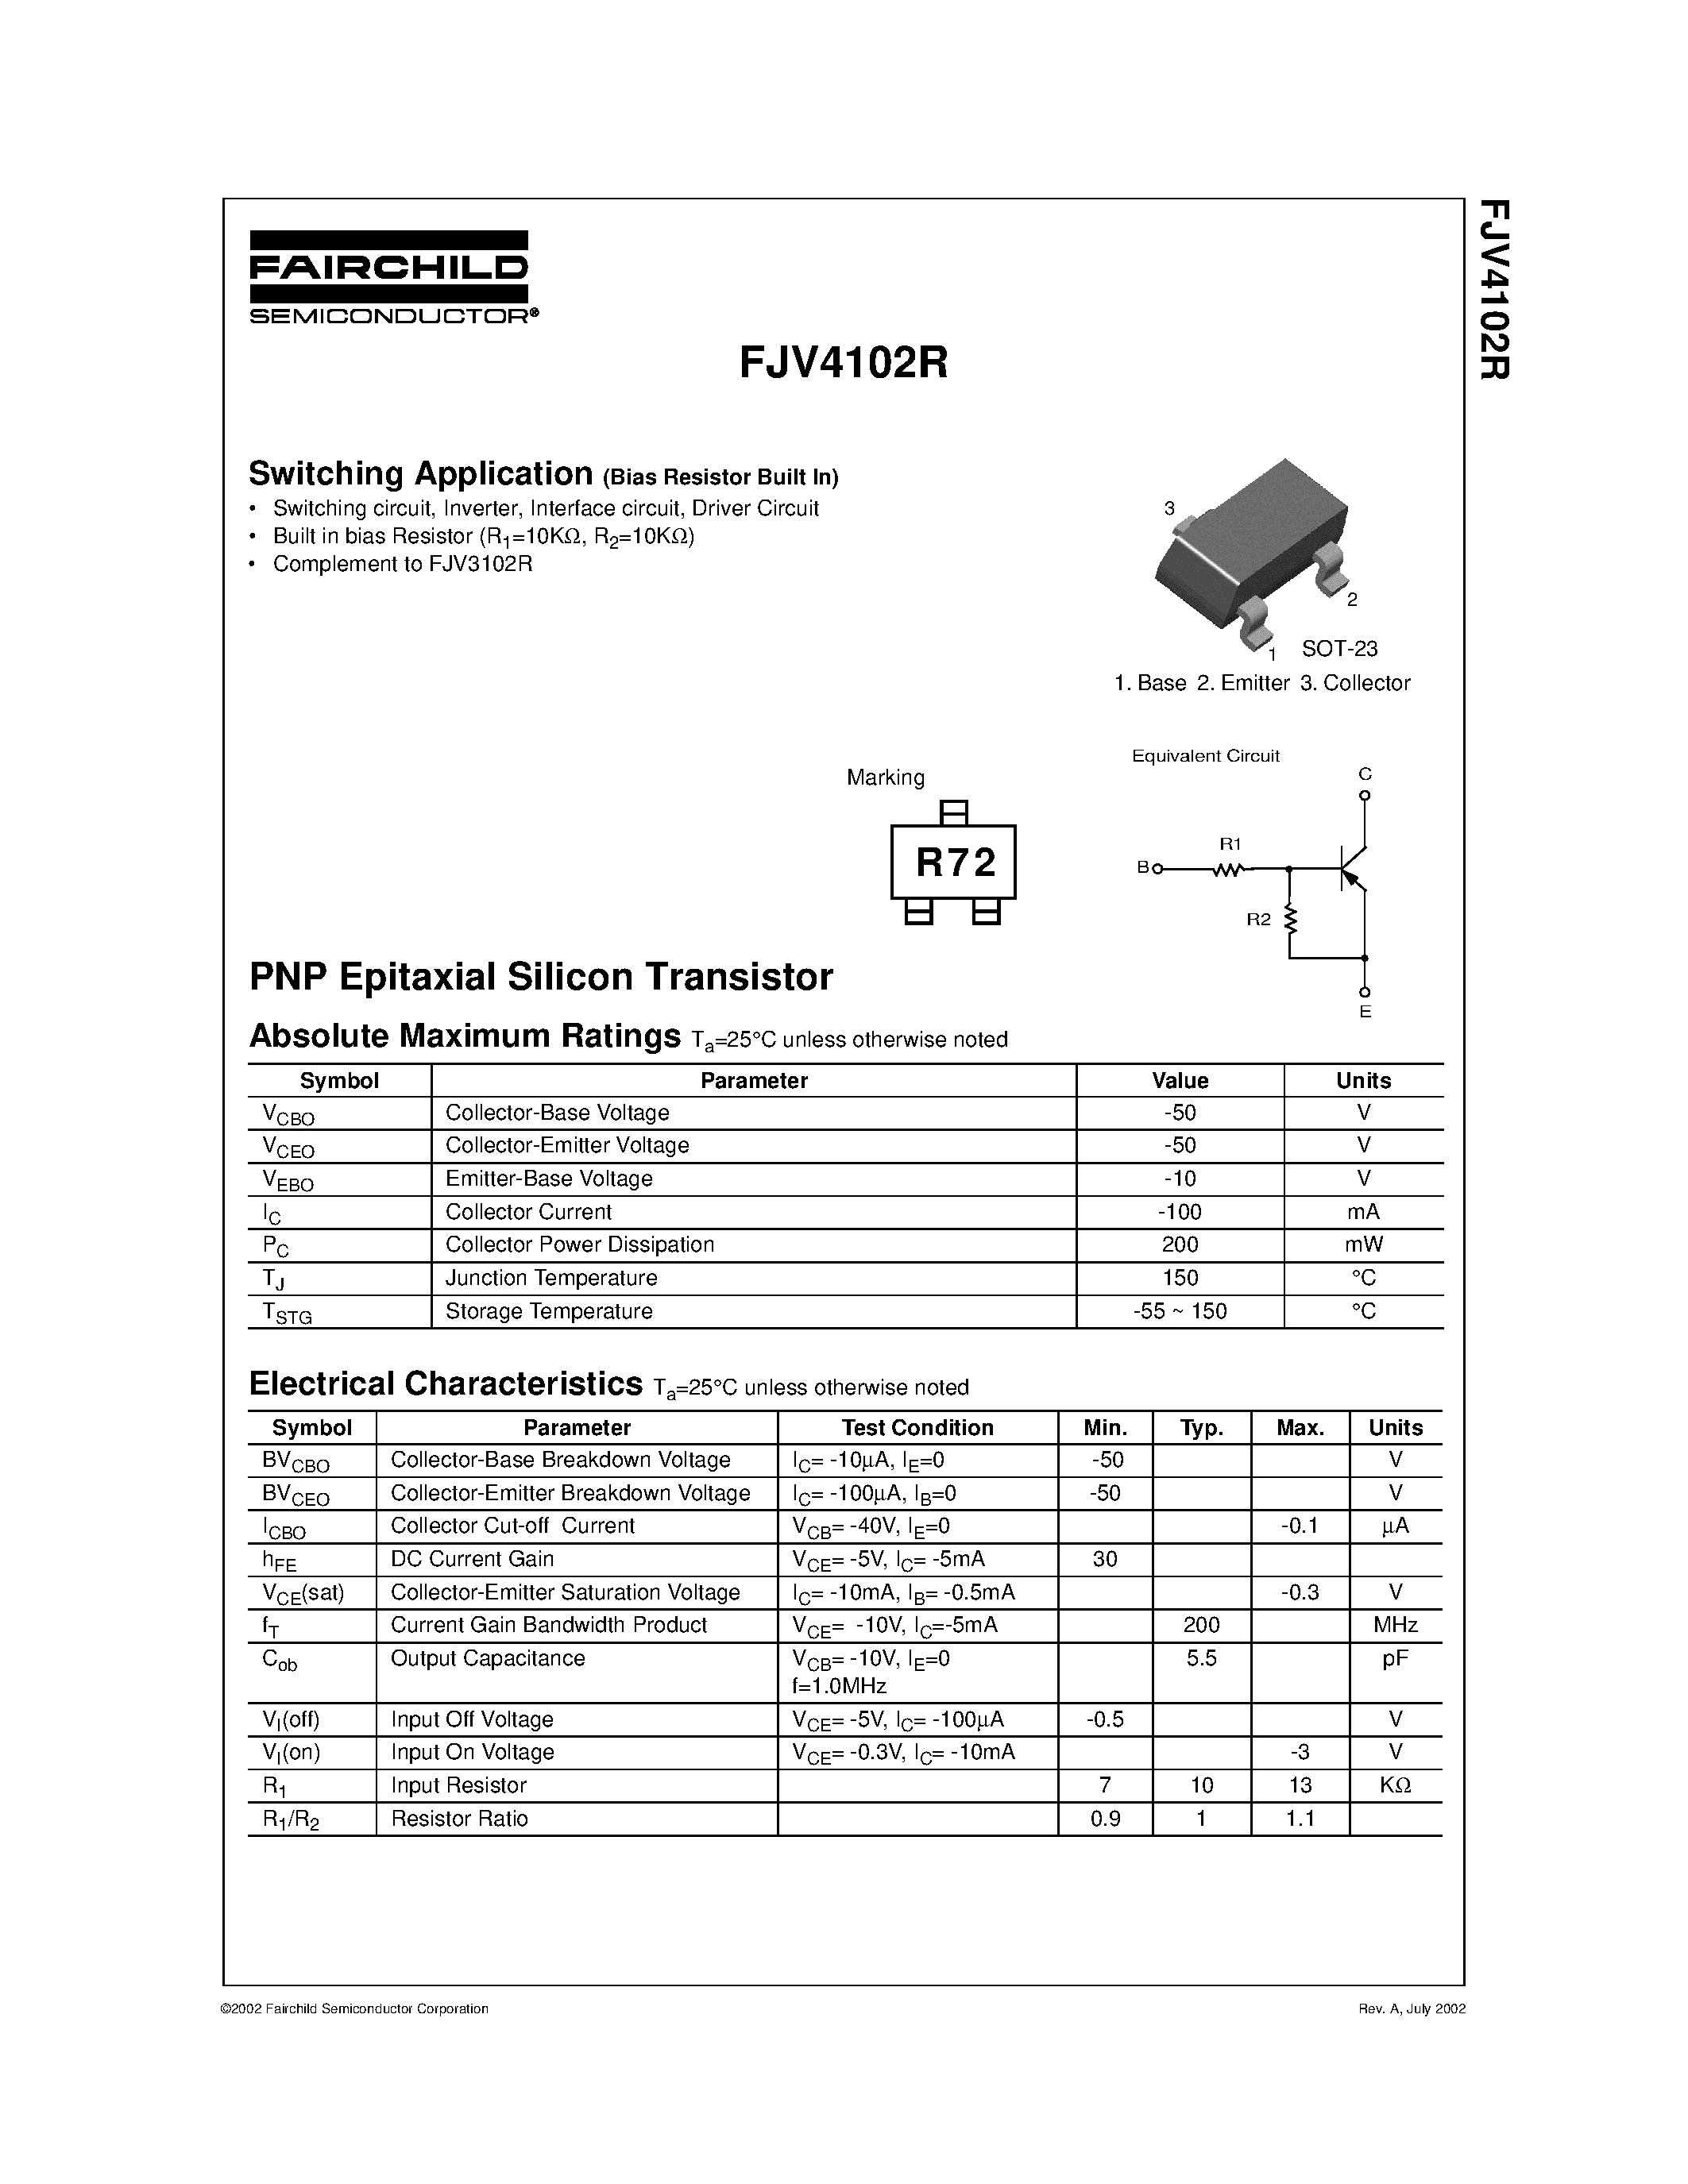 Datasheet FJV4102R - PNP Epitaxial Silicon Transistor page 1